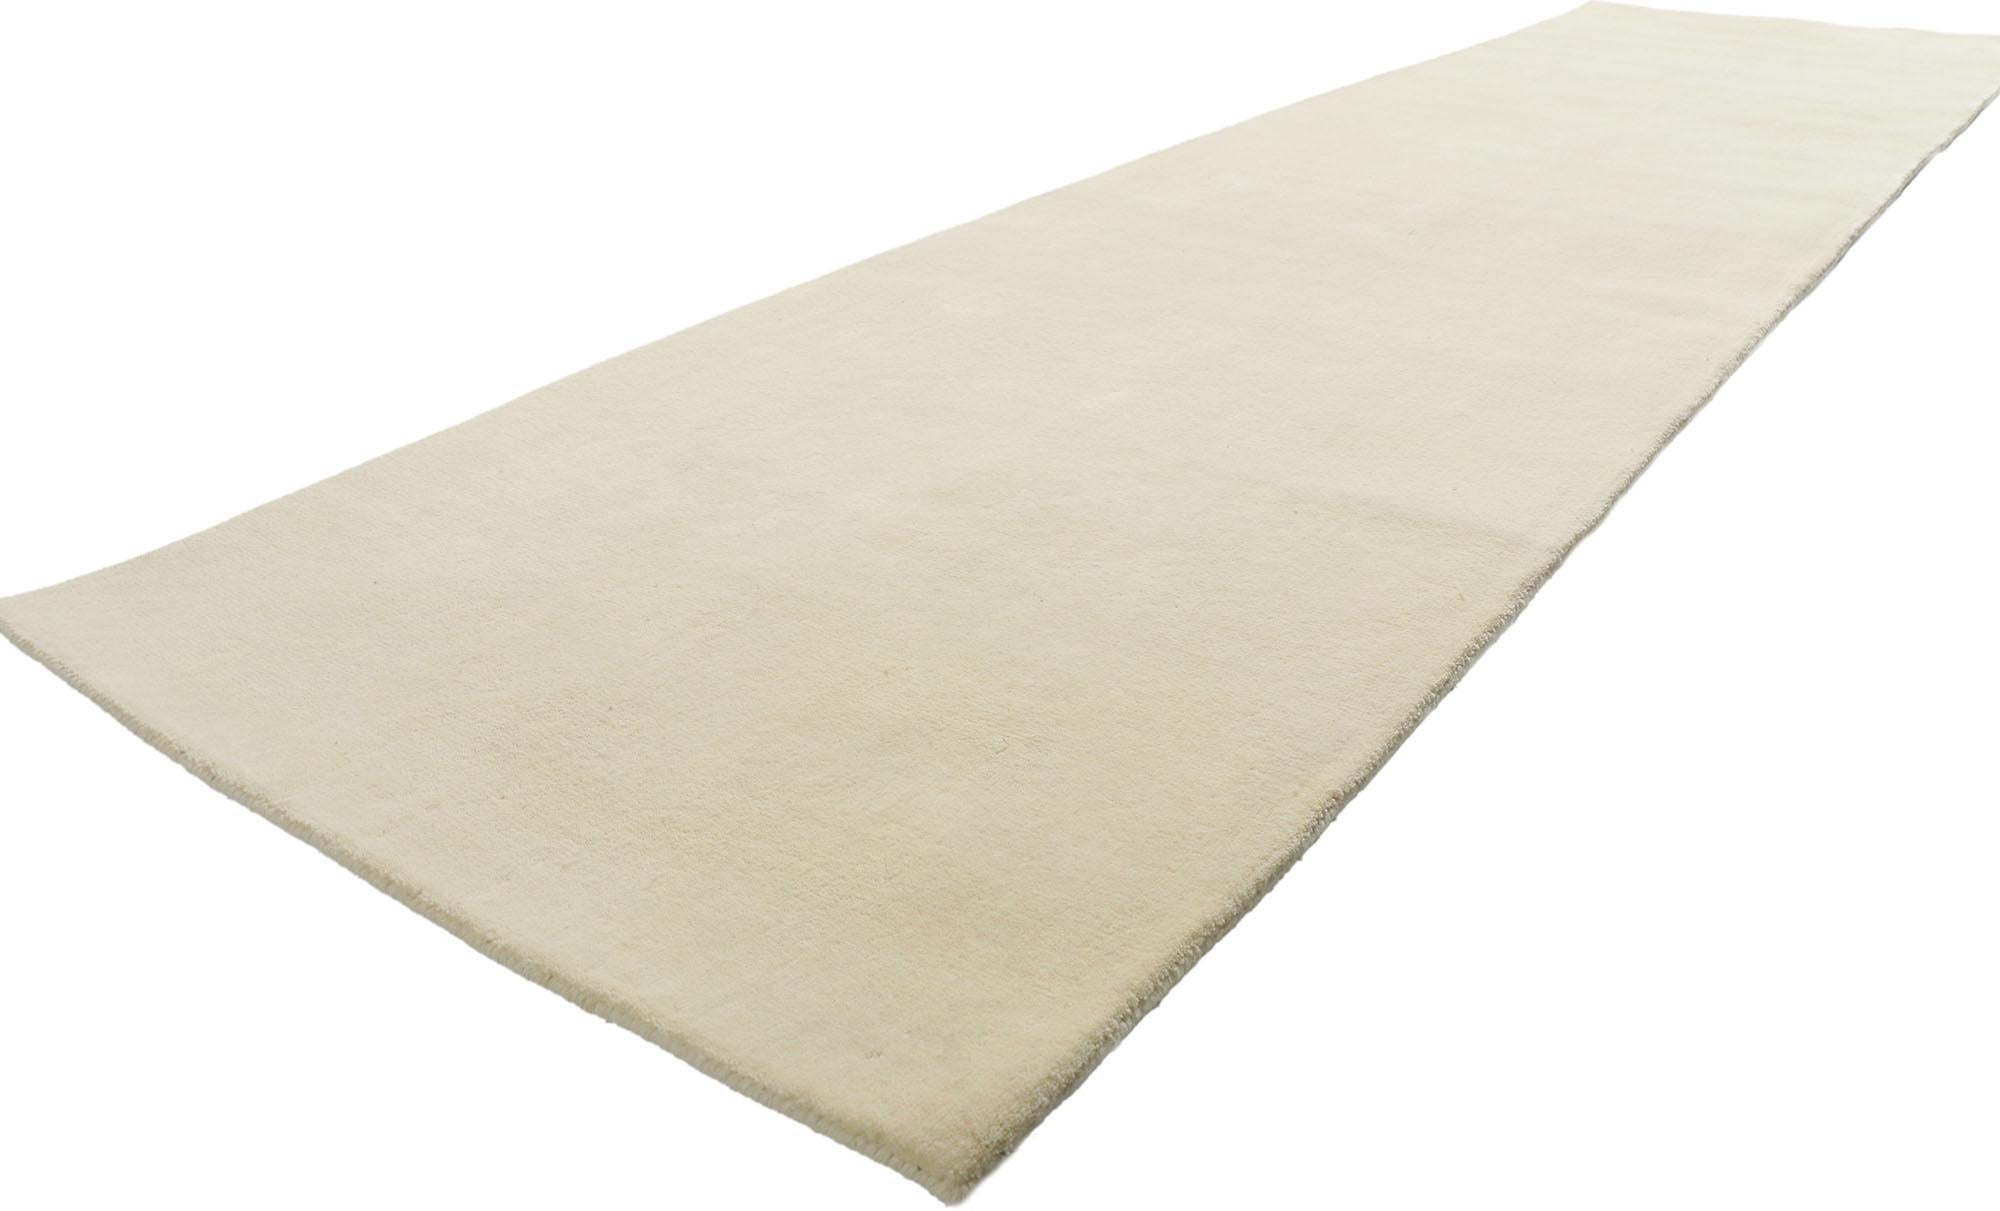 30755 New Contemporary Ivory Rug Runner with Minimalist Style, 03'02 x 11'11. Wrapped in an enchanting world of modern allure and understated minimalism, this hand-loomed wool rug emerges from the skilled looms of contemporary India. Its essence